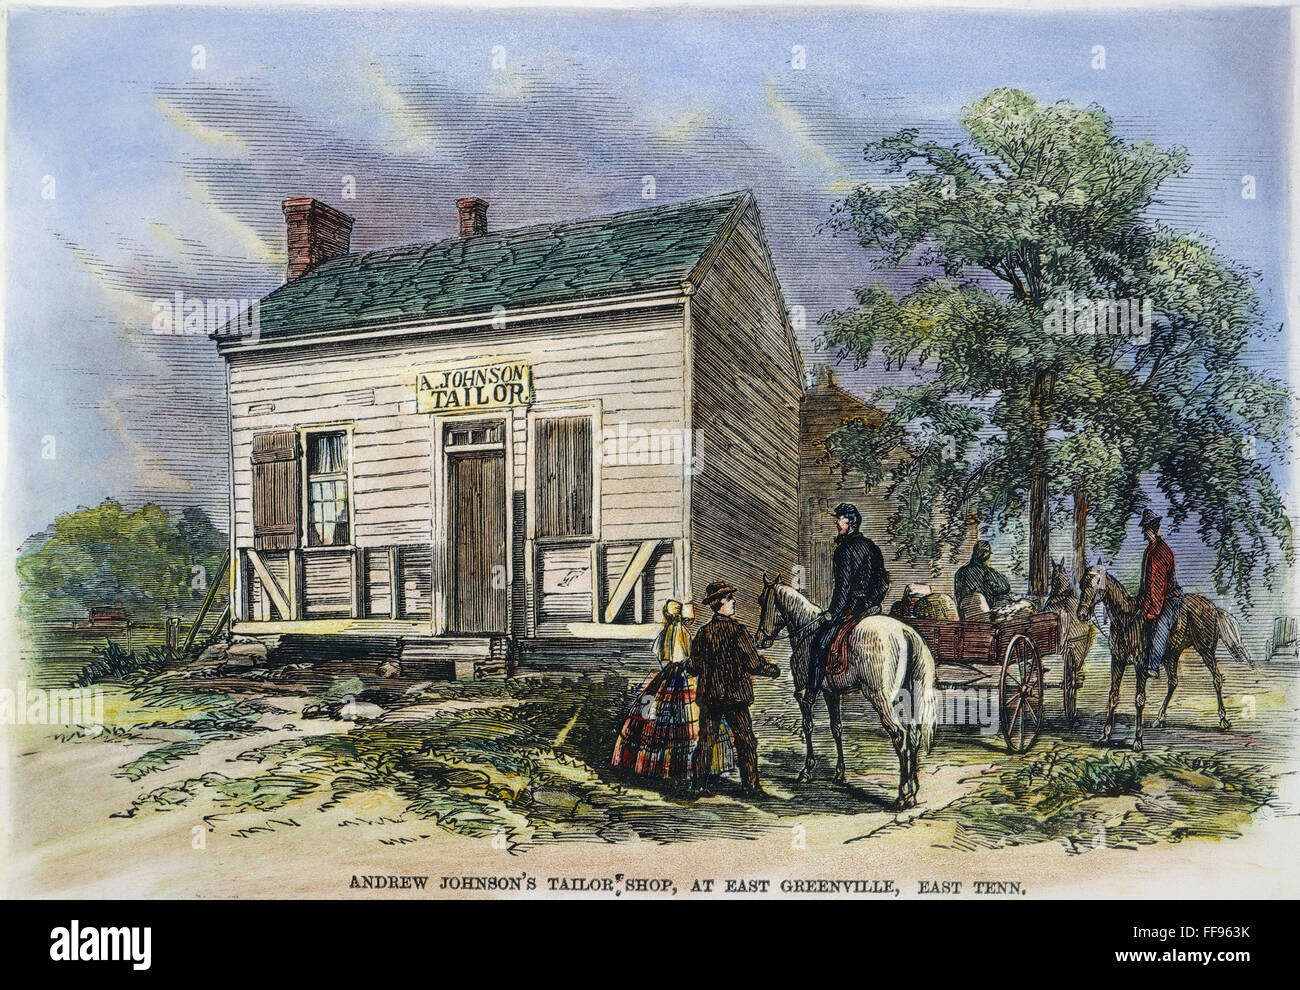 ANDREW JOHNSON: TAILOR. /nThe tailor shop at Greenville, Tennessee, of which Andrew Johnson was proprietor before entering politics; American engraving, 1865. Stock Photo